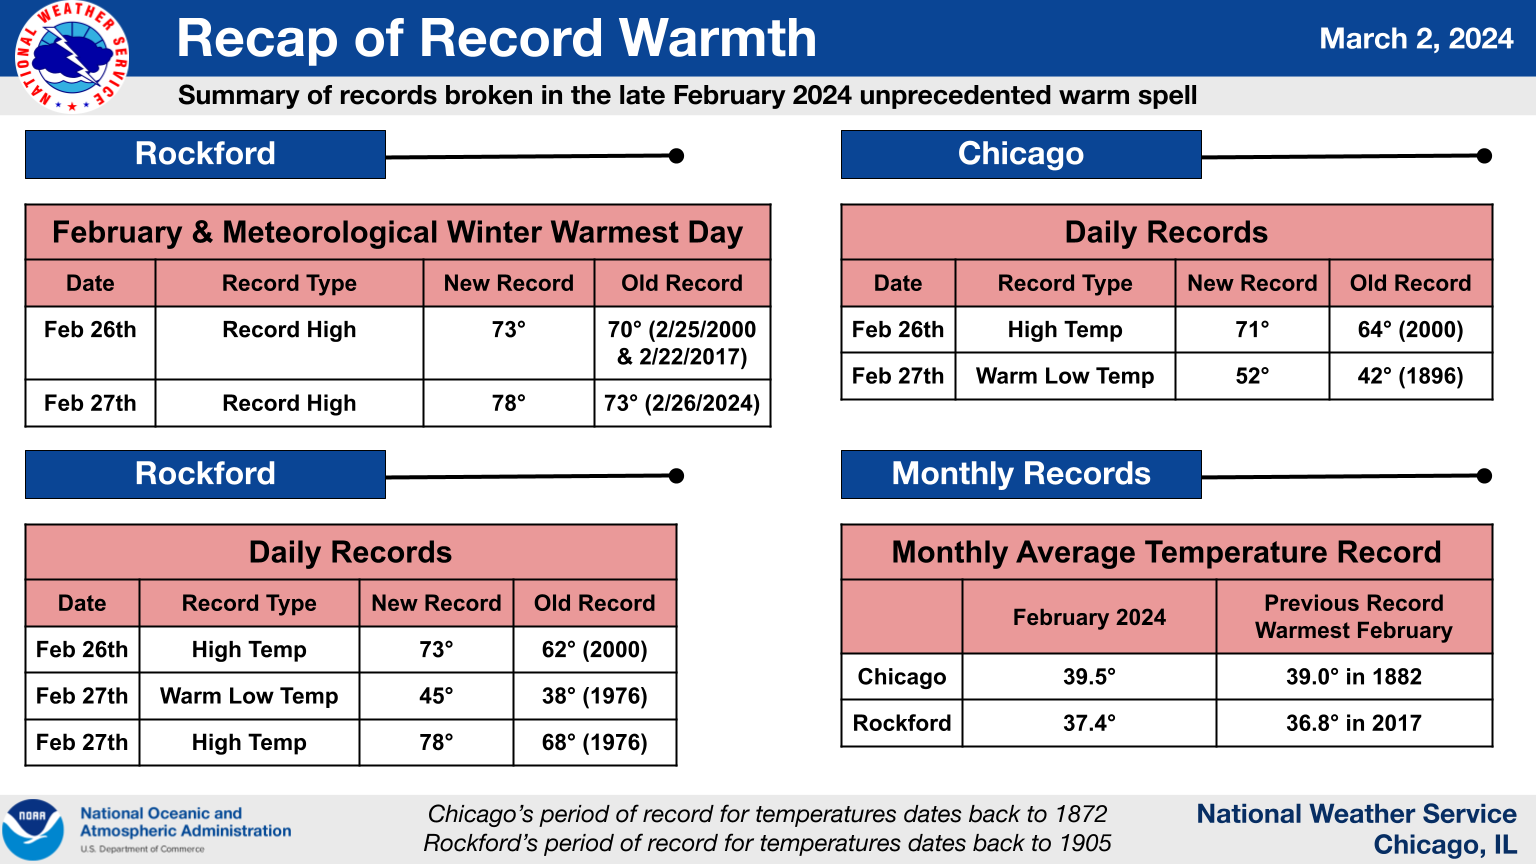 Graphic summarizing the record warmth observed at the end of February